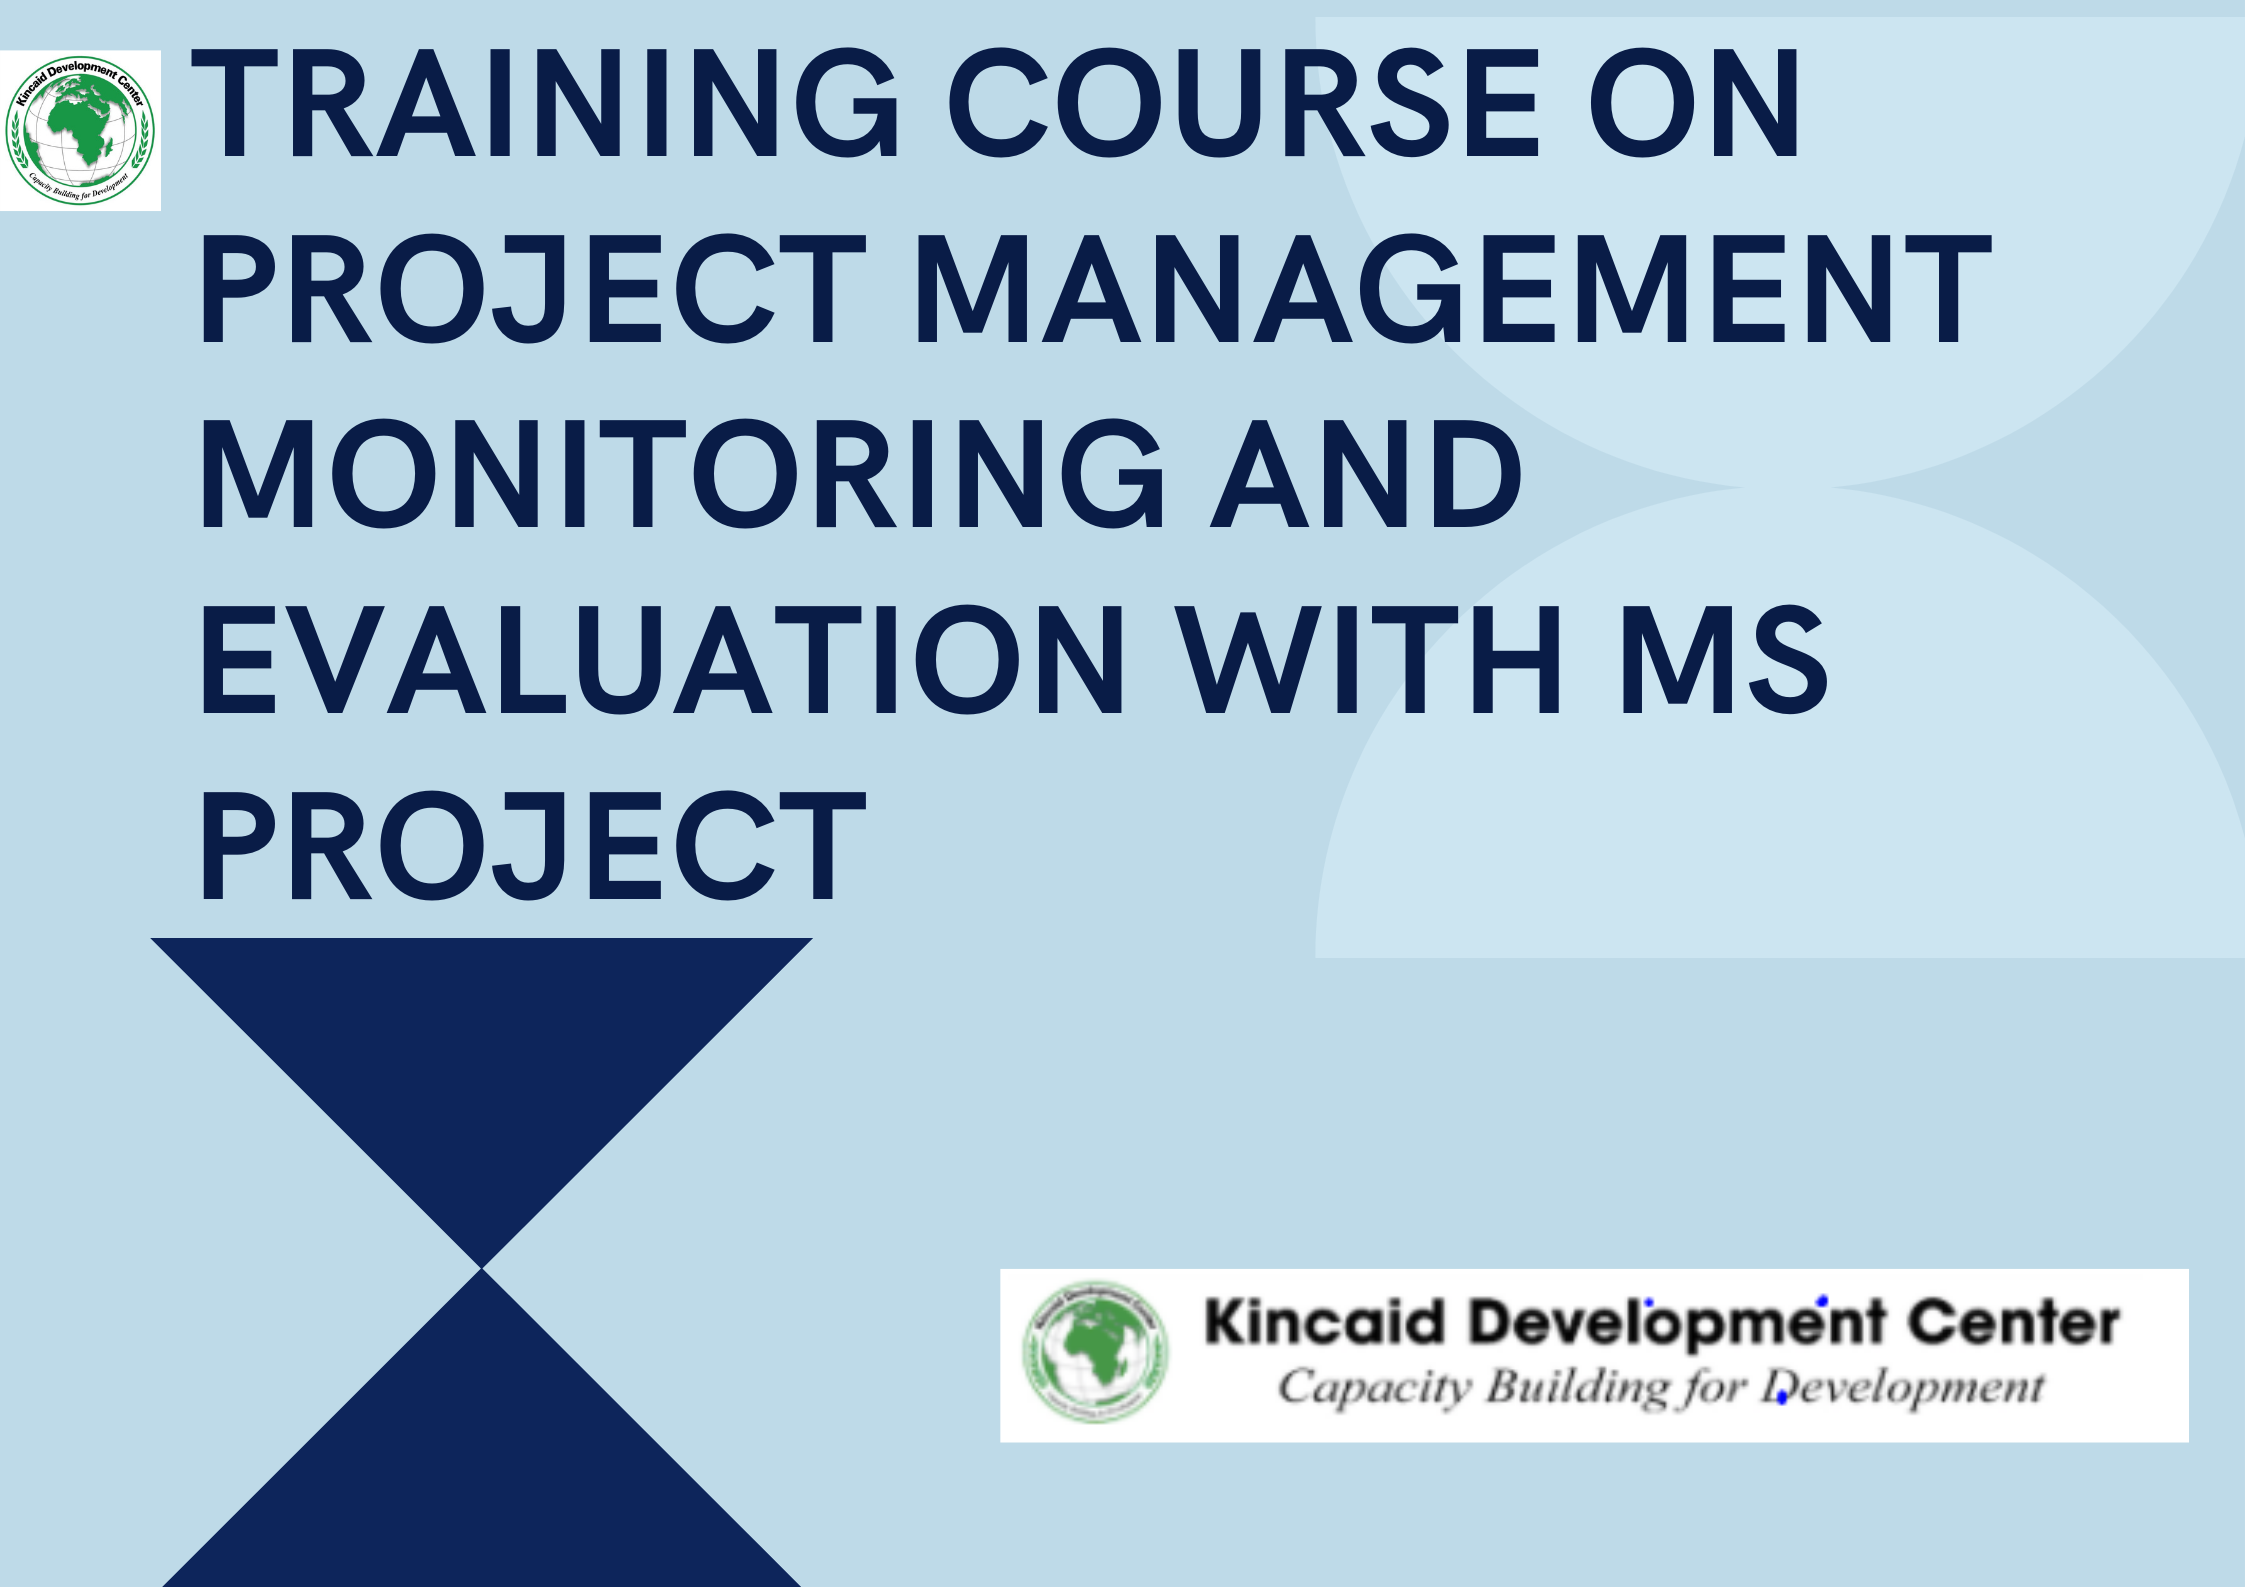 TRAINING COURSE ON PROJECT MANAGEMENT MONITORING AND EVALUATION WITH MS PROJECT, Nairobi, Kenya